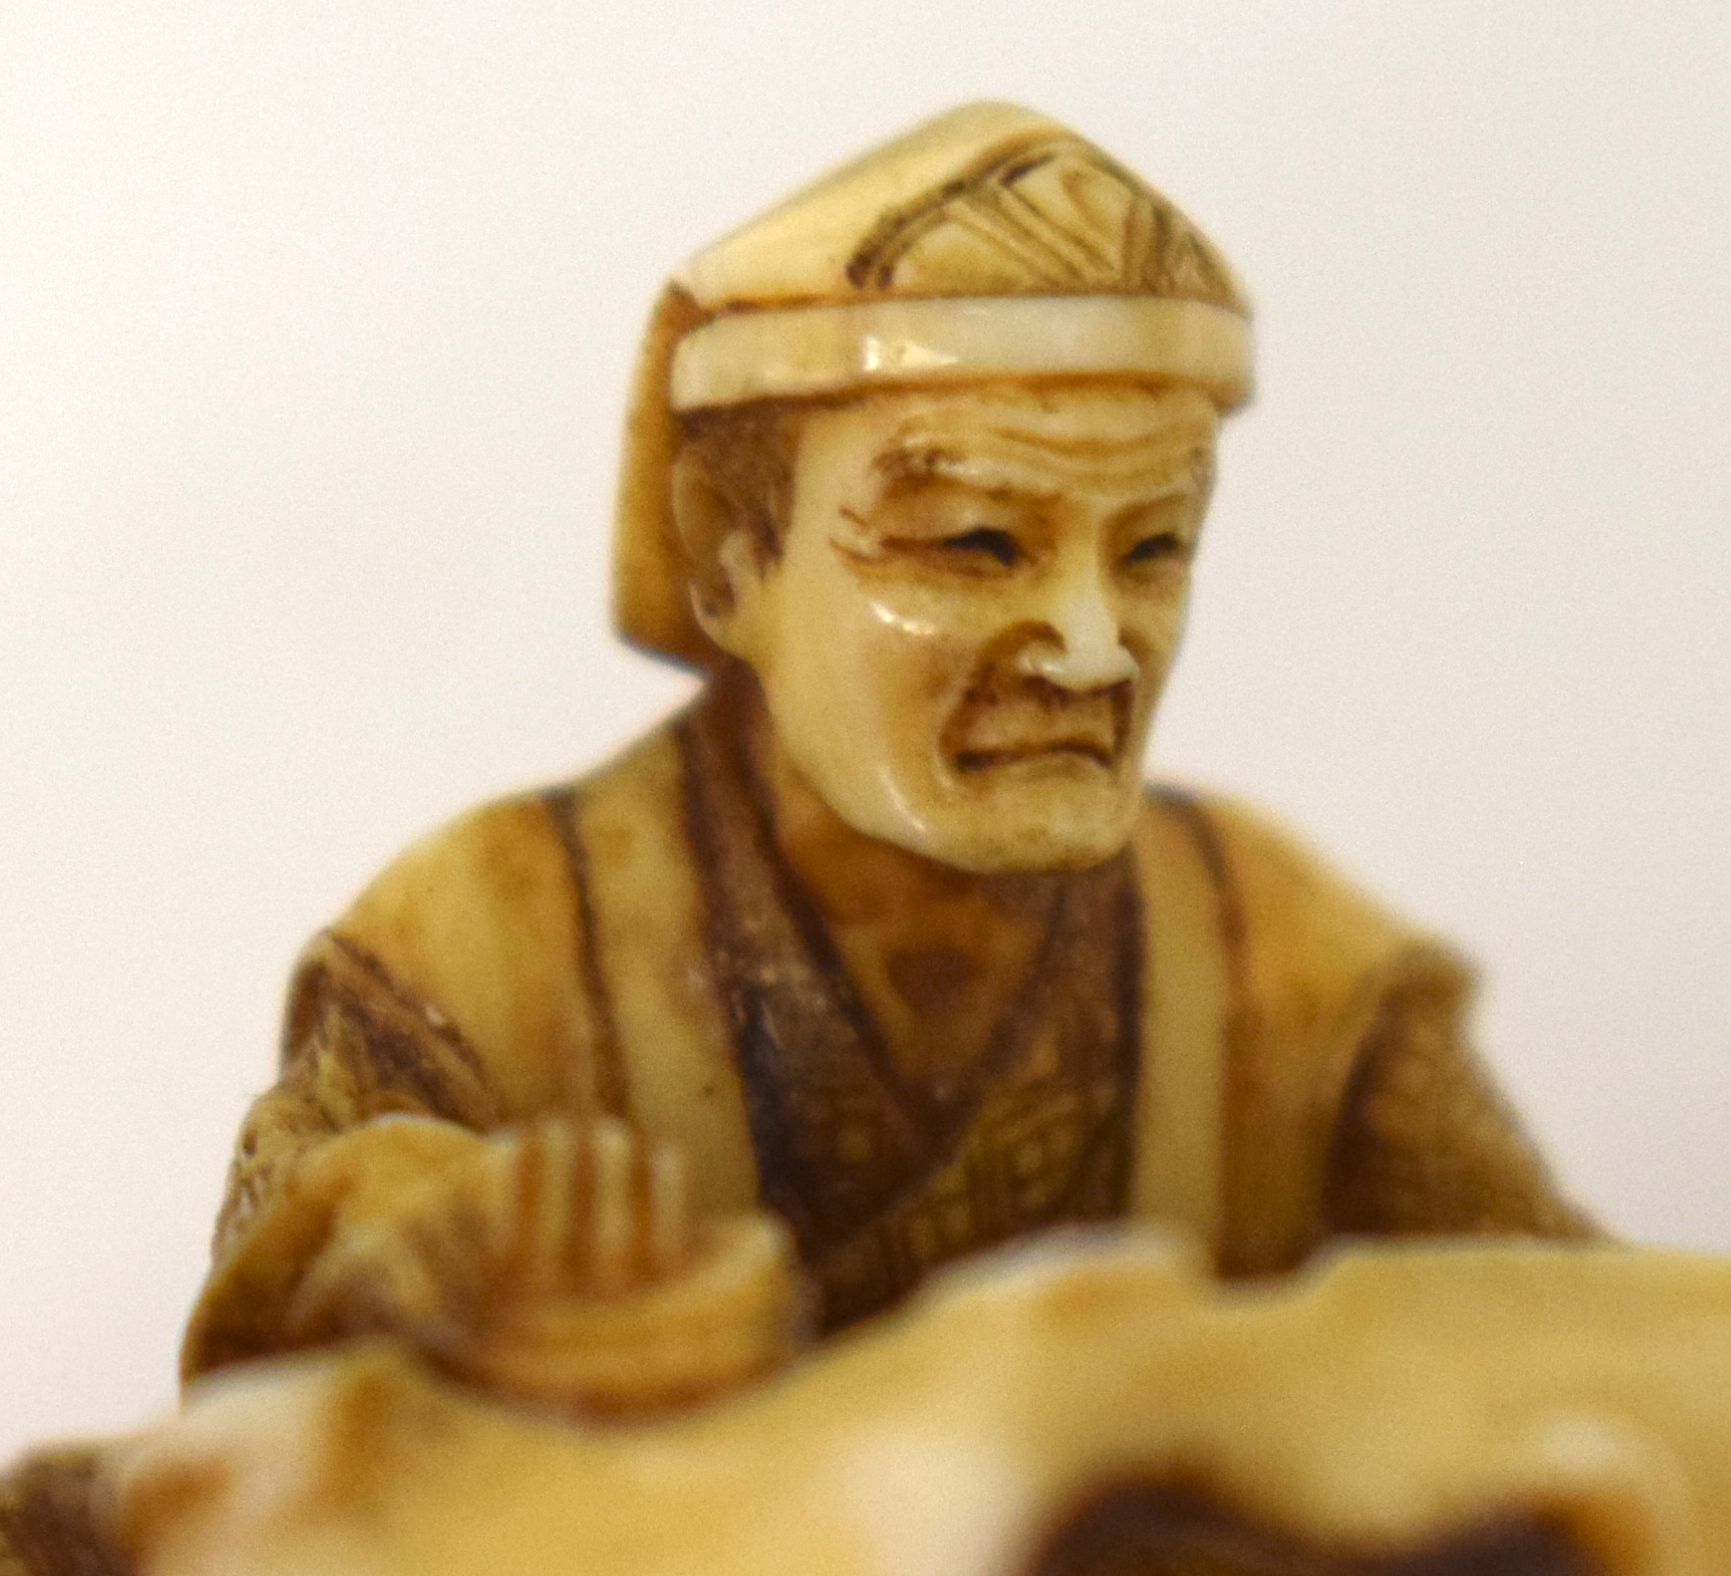 A 19TH CENTURY JAPANESE MEIJI PERIOD CARVED IVORY NETSUKE modelled as a male holding a sack. 3 cm x - Image 10 of 13